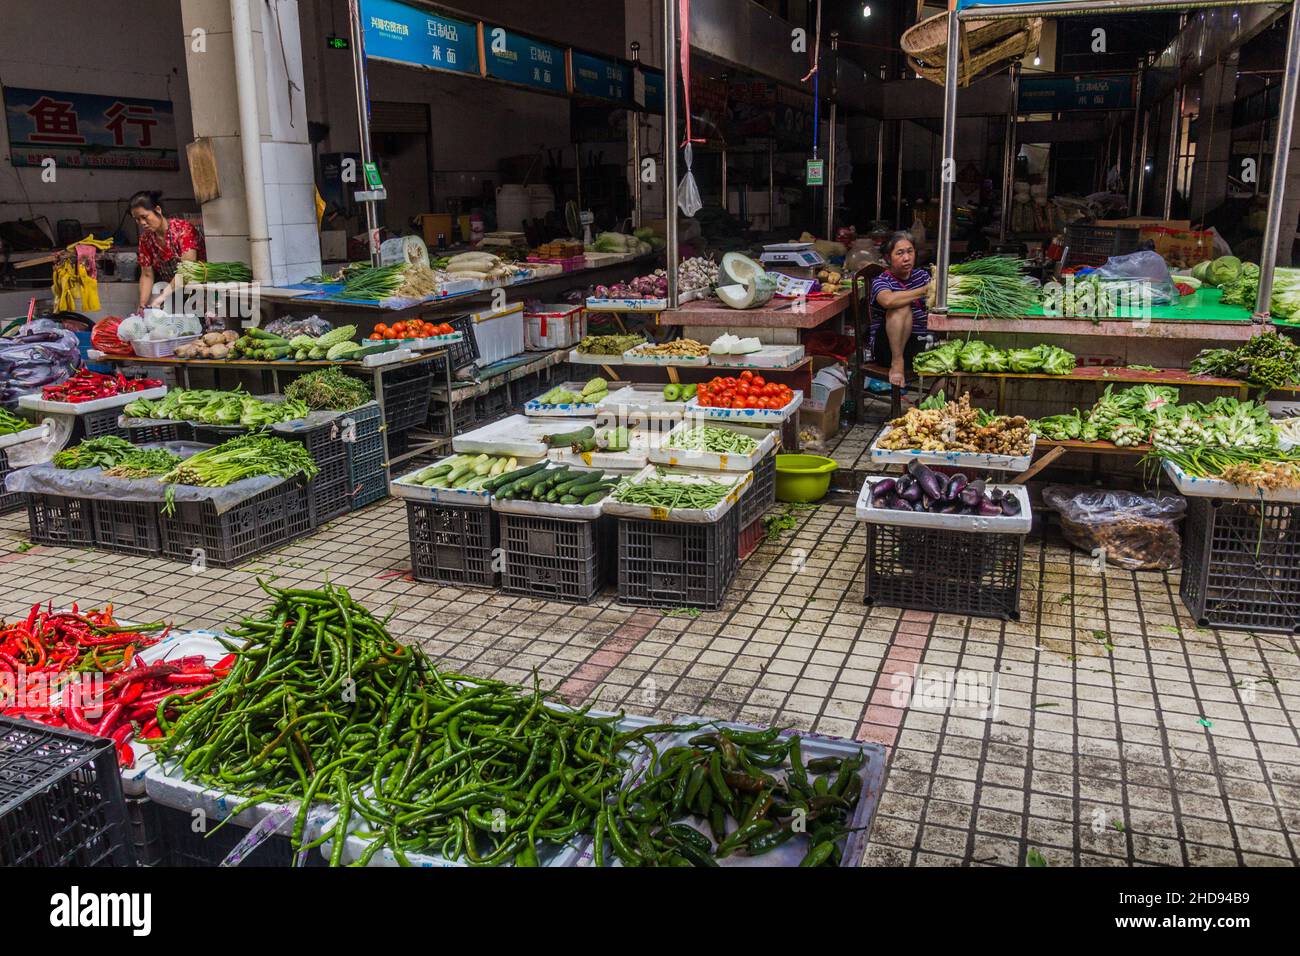 FENGHUANG, CHINA - AUGUST 14, 2018: Vegetable market in Fenghuang Ancient Town, Hunan province, China Stock Photo